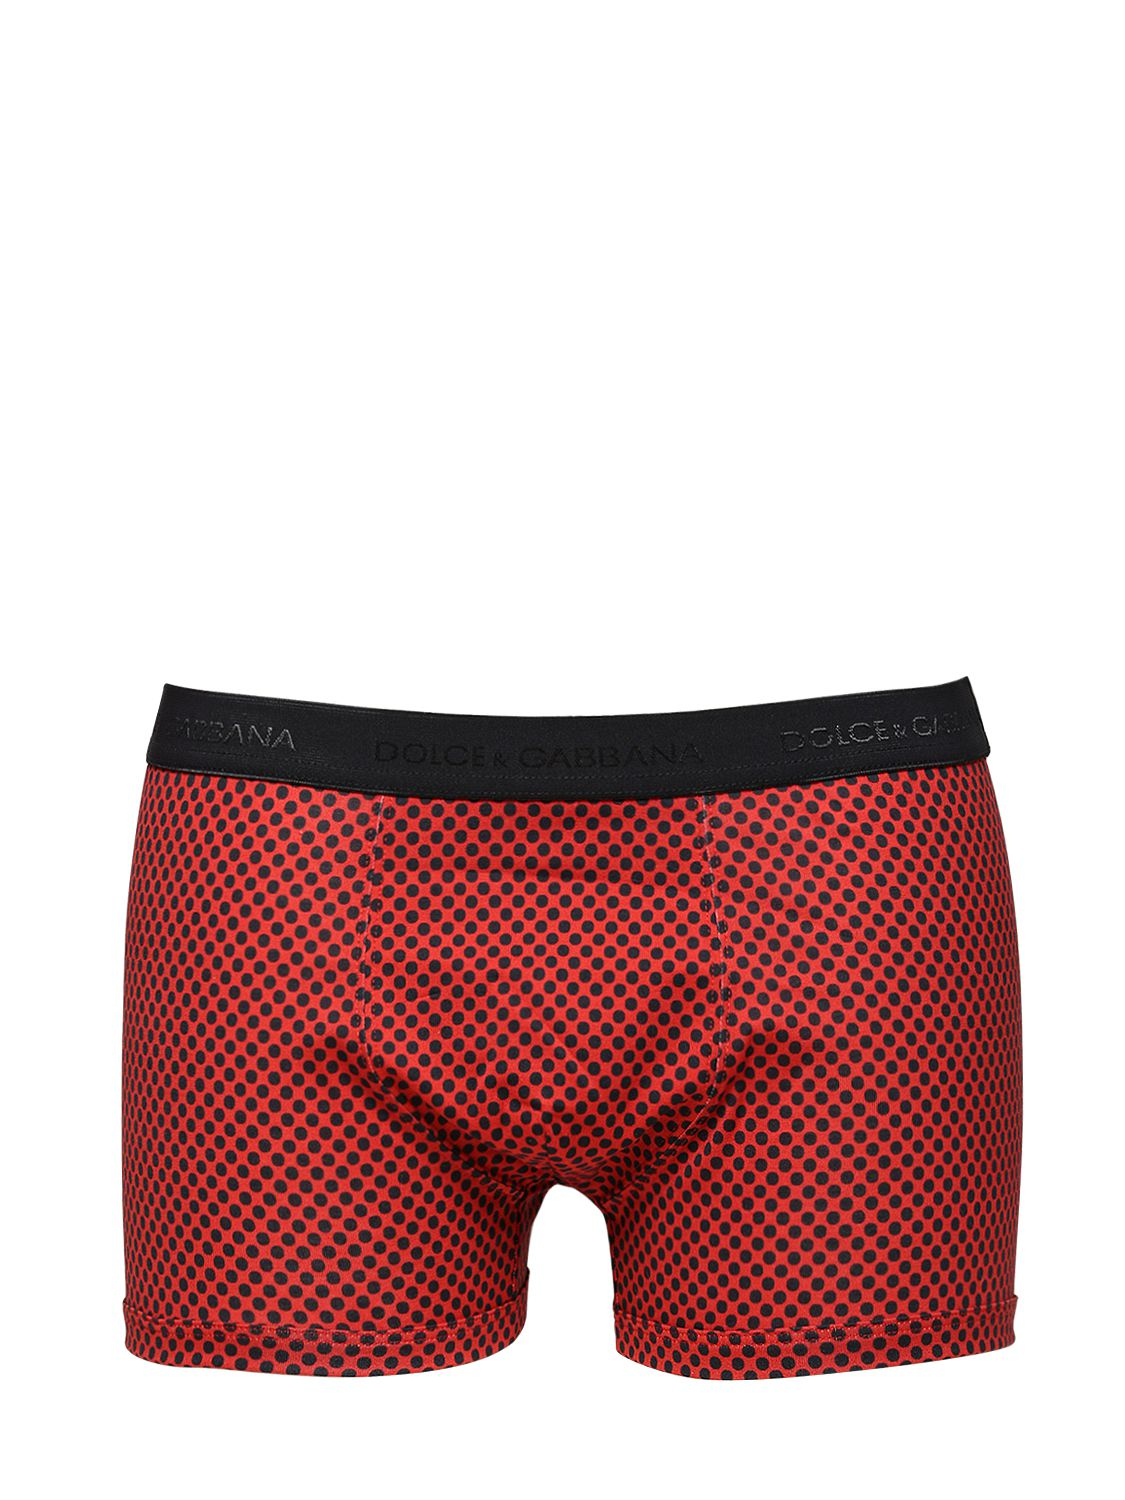 Dolce & gabbana Polka Dot Printed Cotton Boxer Briefs in Red for Men | Lyst